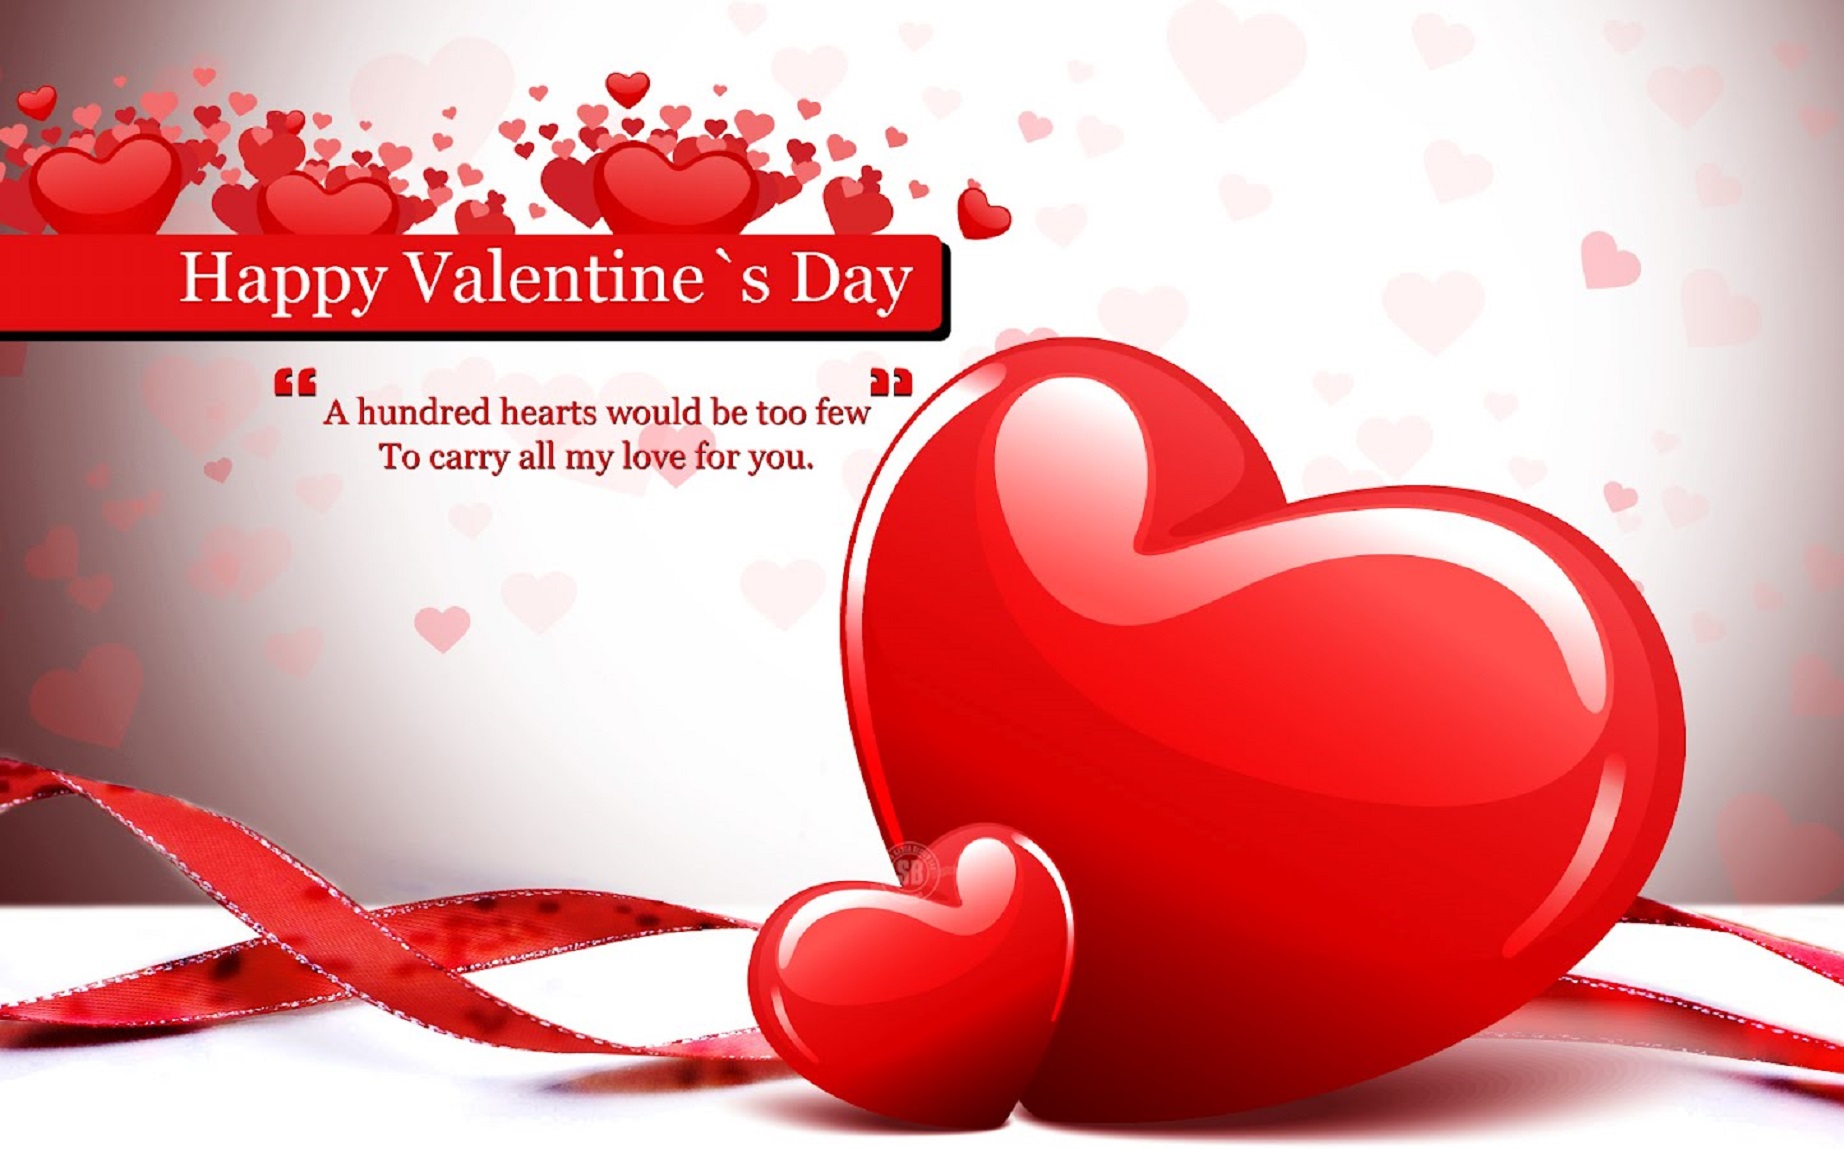 valentines day cards image hd